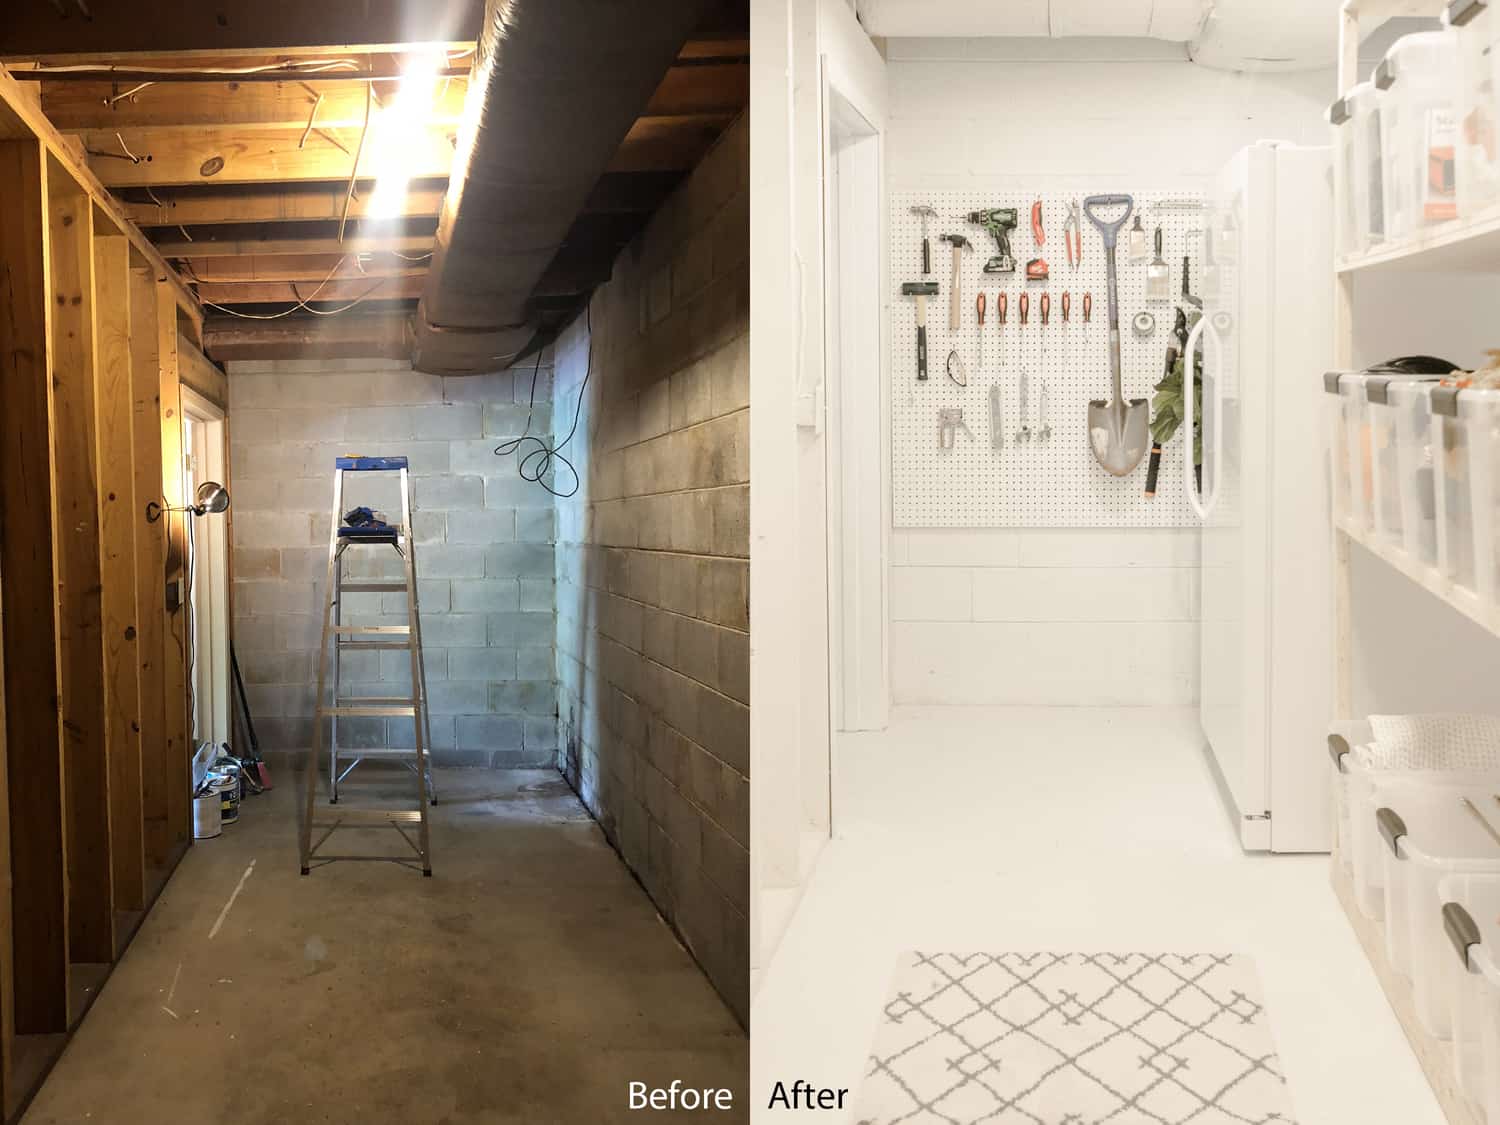 before picture of a basement with brick walls and after photo of storage room with white walls and shelves of bins